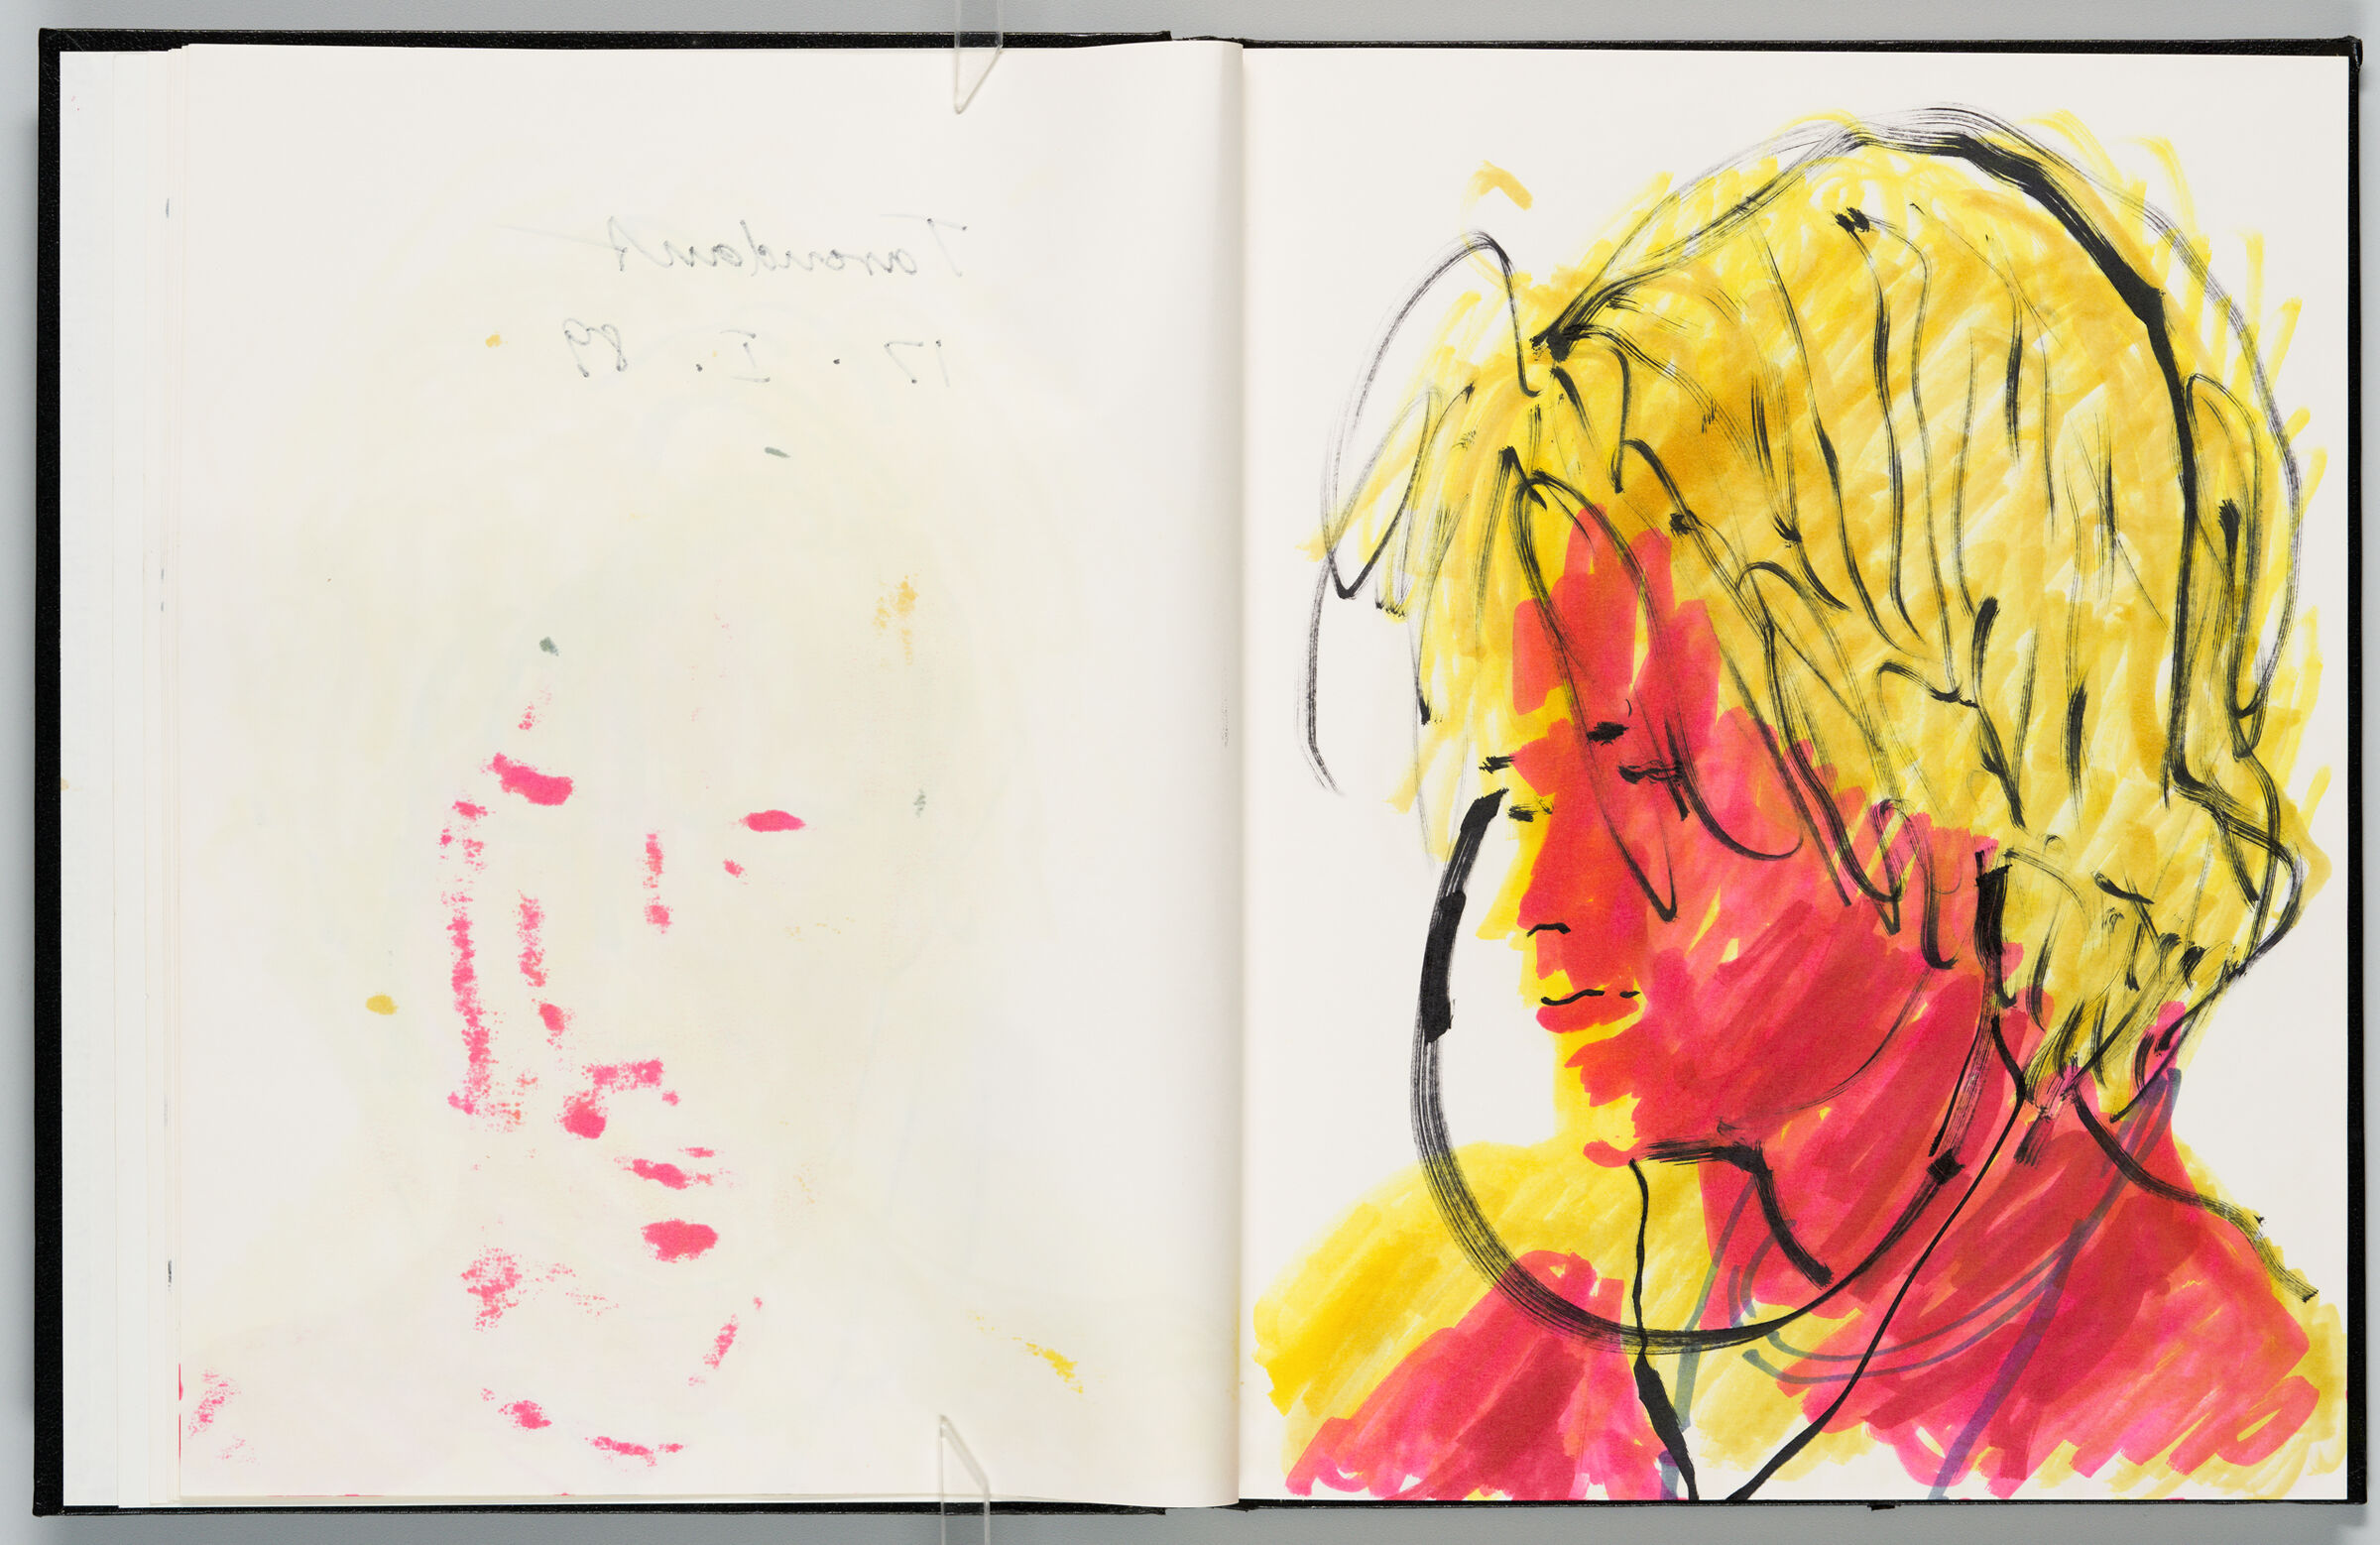 Untitled (Bleed-Through Of Previous Page, Left Page); Untitled (Study Of Female Figure With Headphones, Right Page)